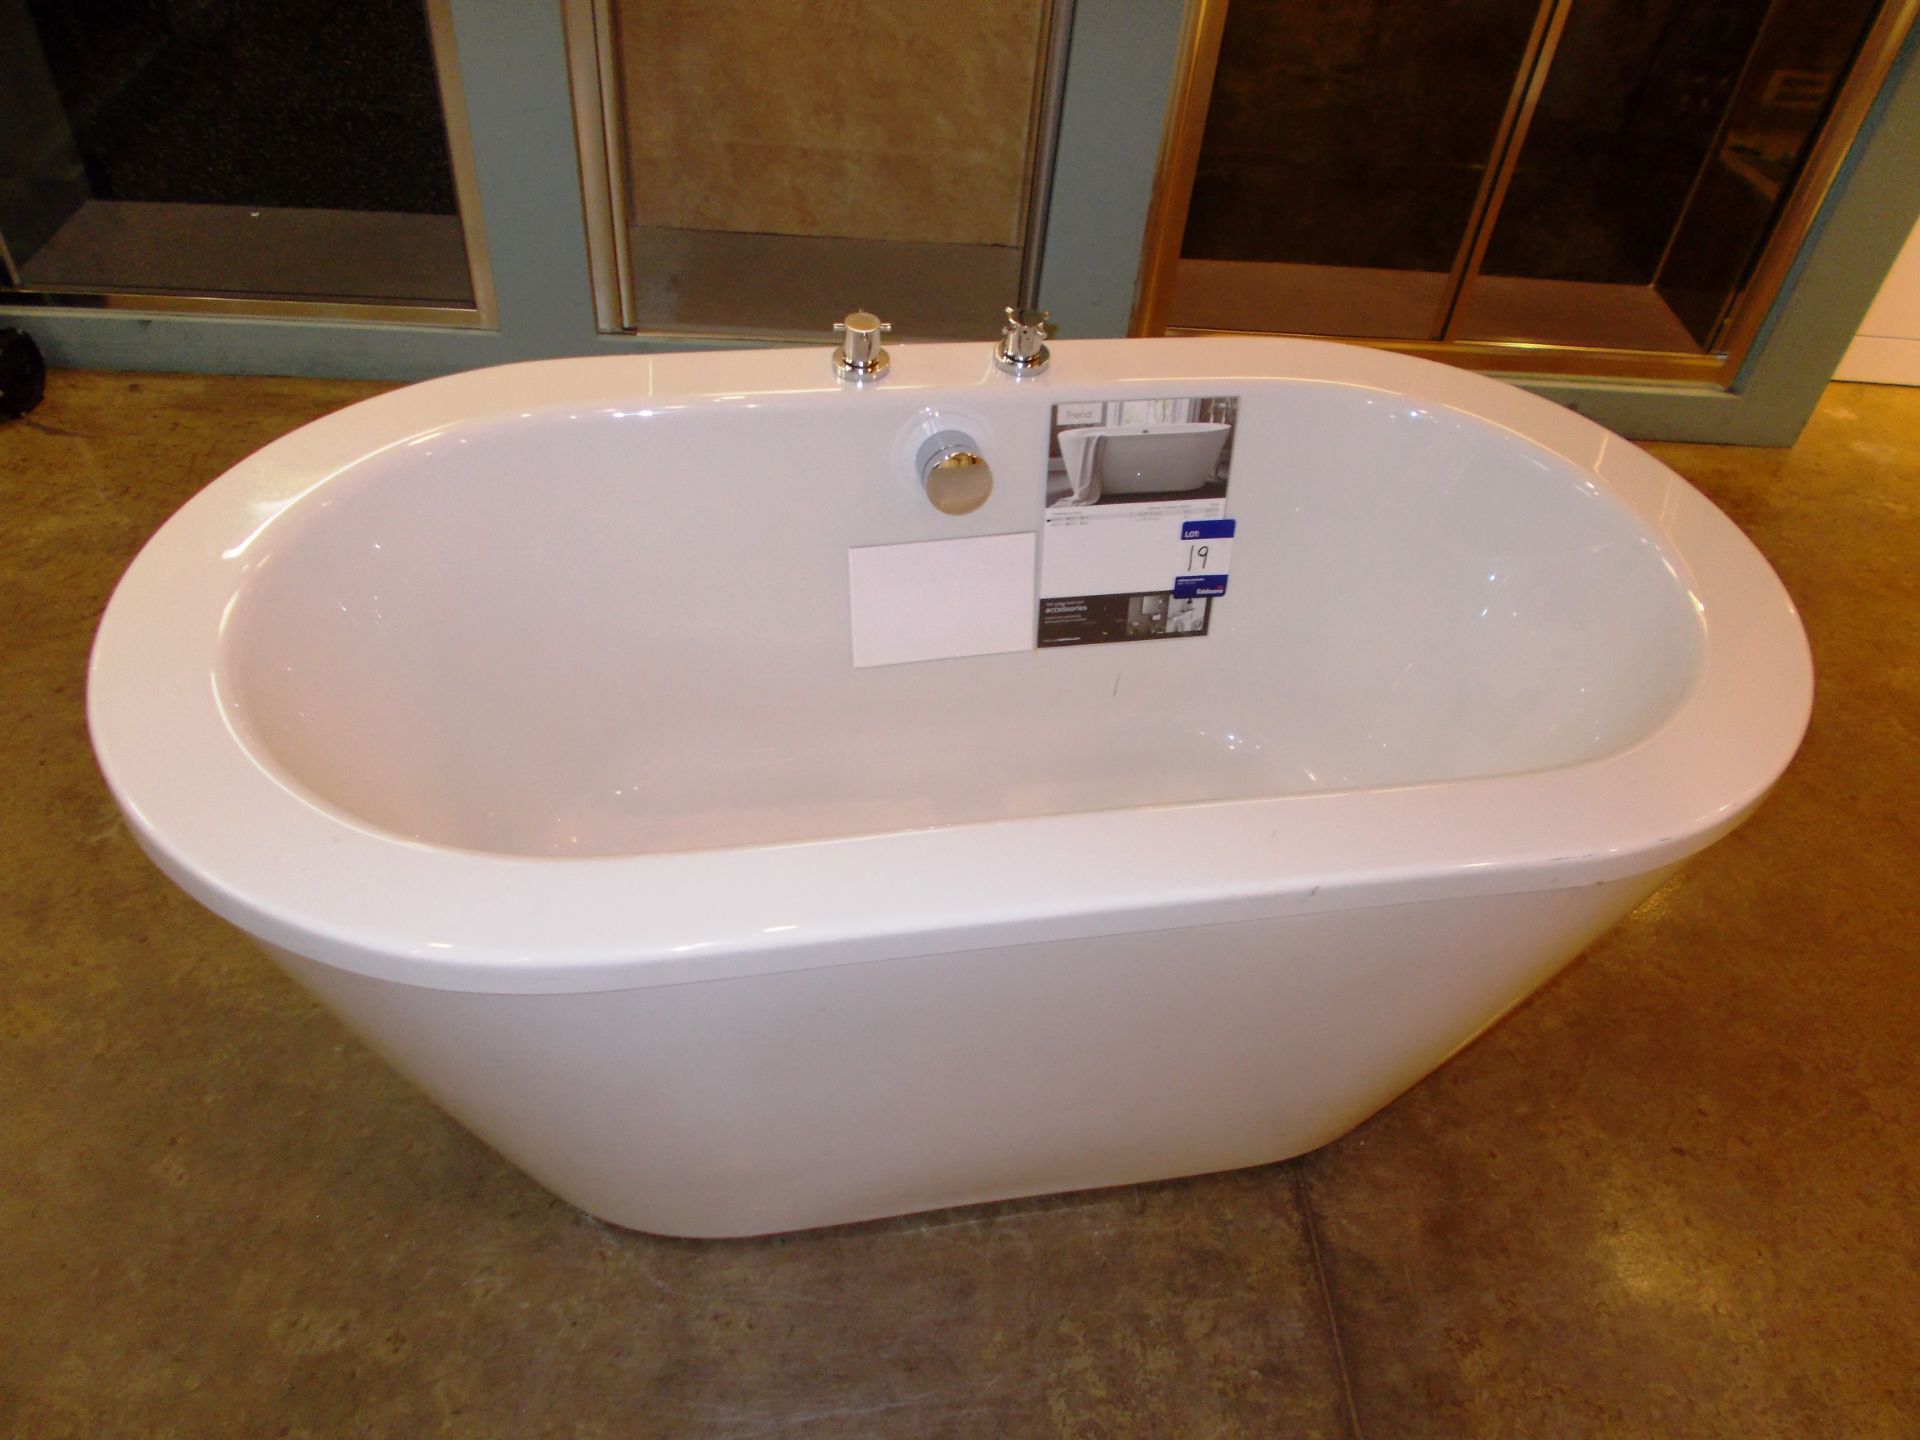 Trend 1500 freestanding bath, with 104 litre capacity. RRP £635